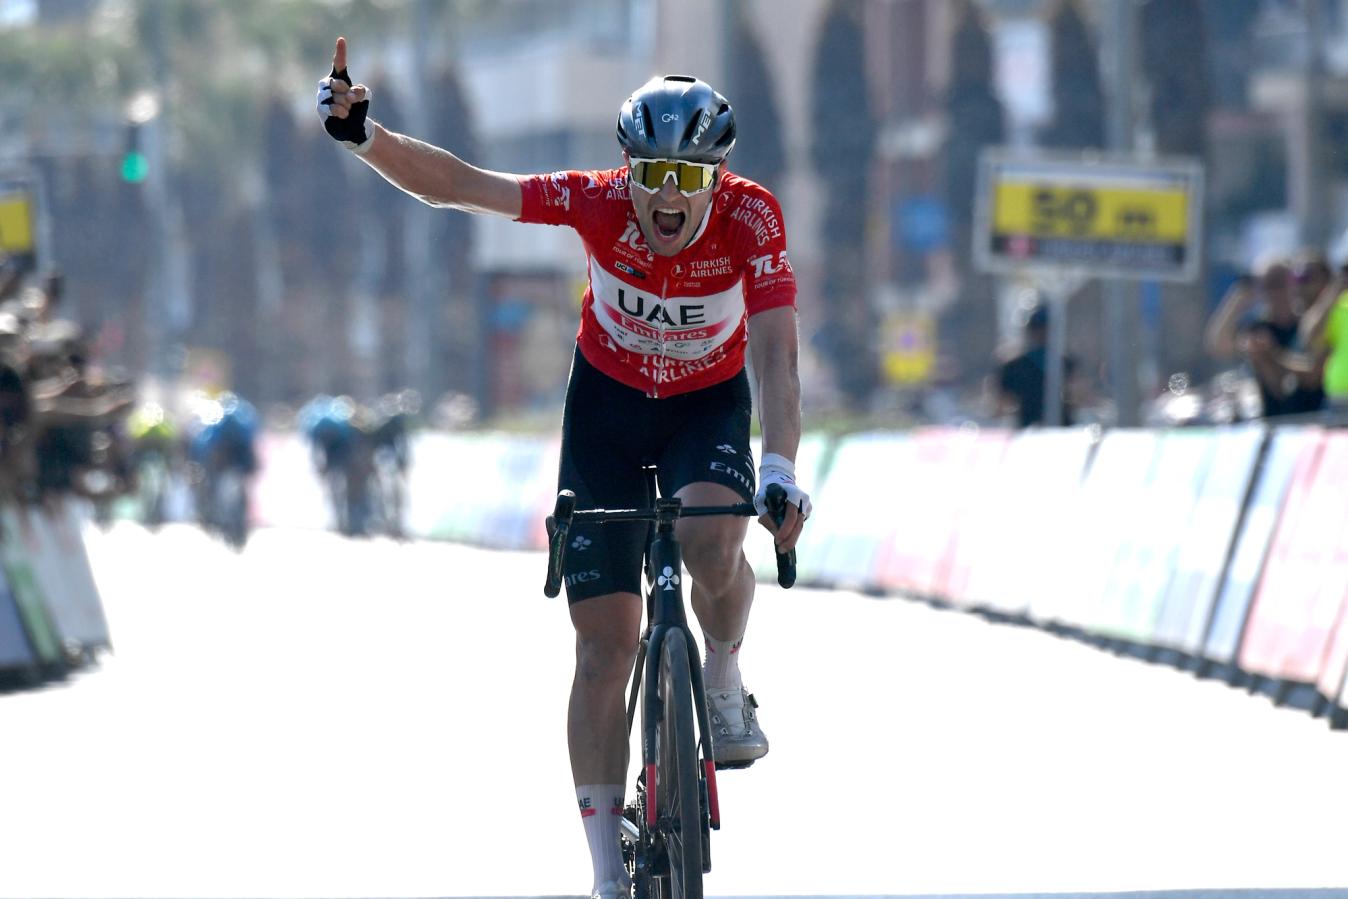 In taking the victory on stage 7, Jay Vine also sealed his win in the mountains classification in Turkey